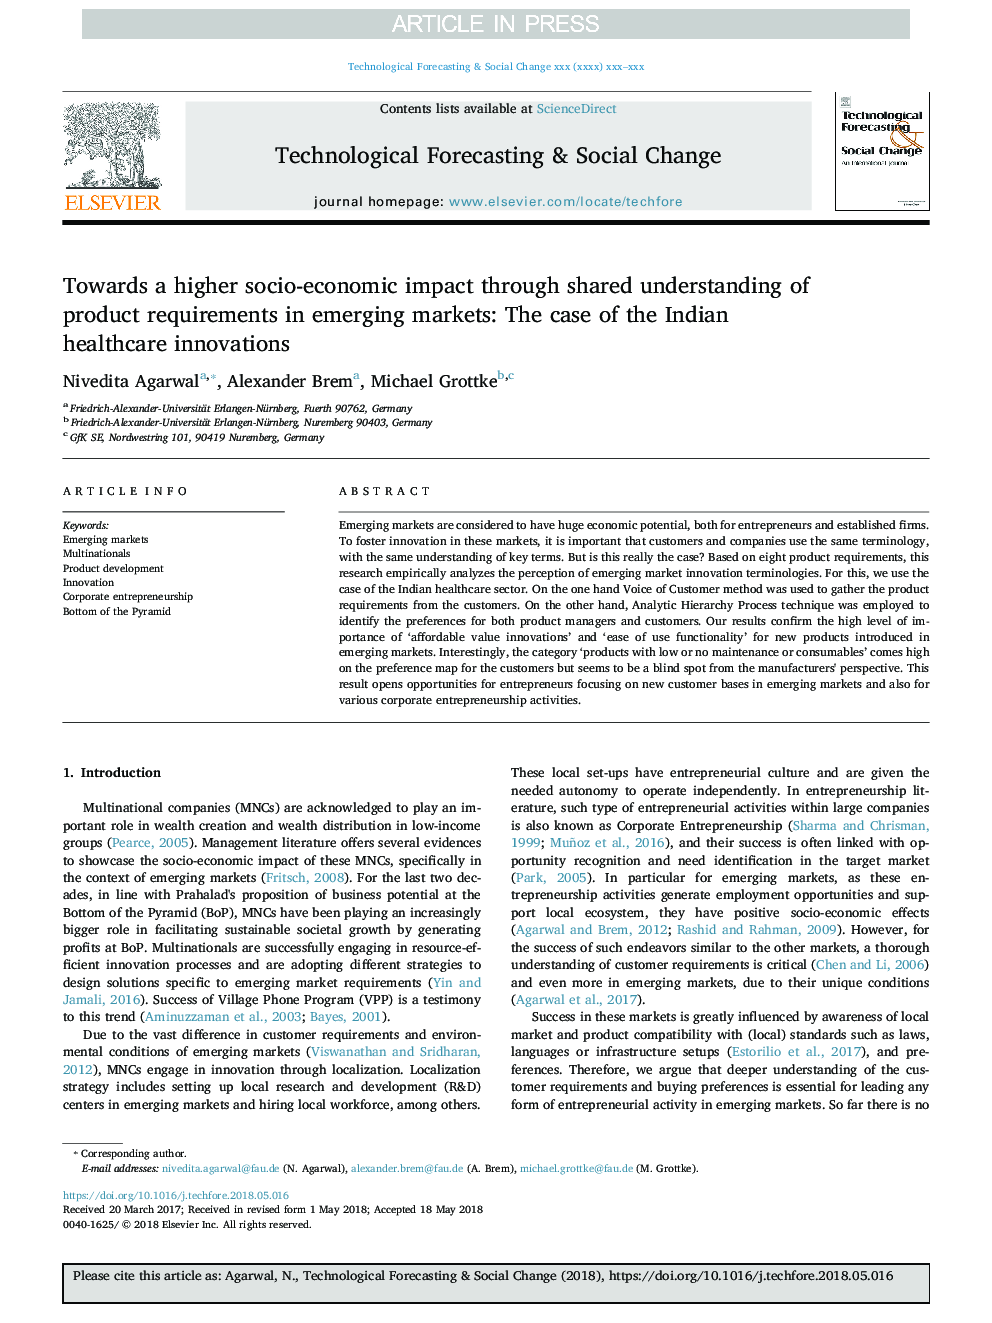 Towards a higher socio-economic impact through shared understanding of product requirements in emerging markets: The case of the Indian healthcare innovations